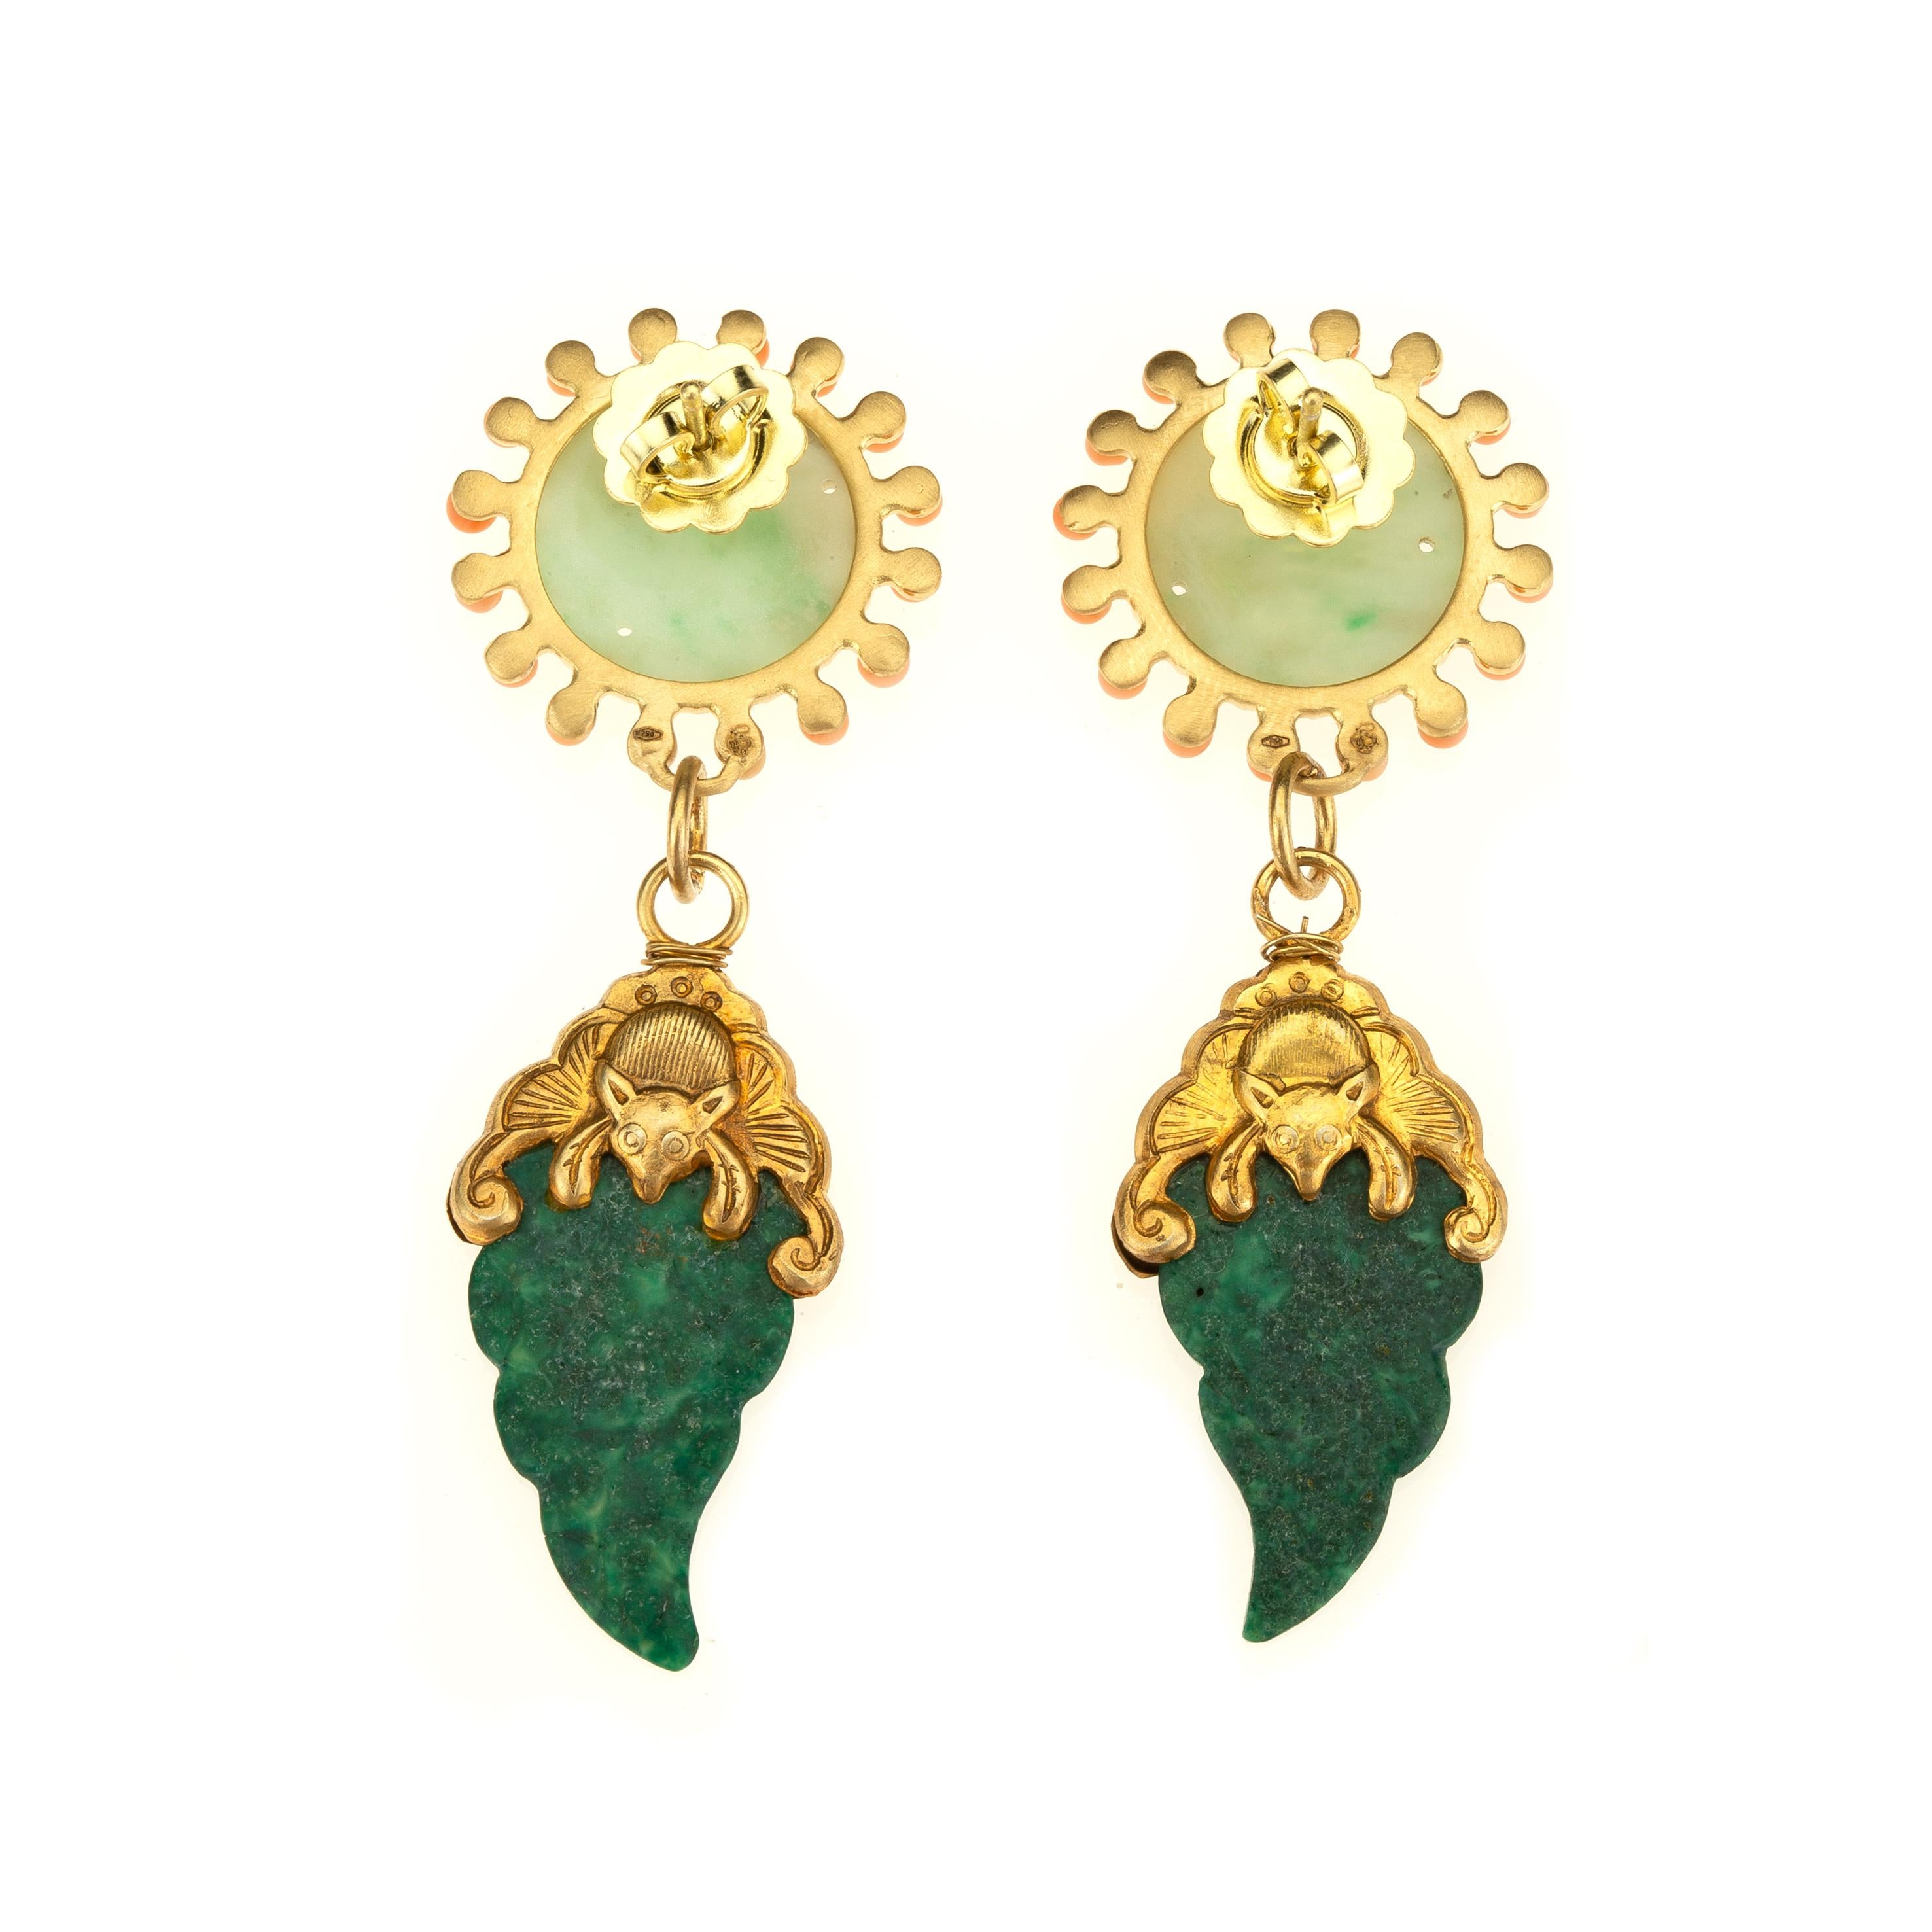 Antiques  carved Jade Coral 18 k Gold gr. 6,80, rare  antiques Chinese Quindg Dynasty walrus Ivory Earrings.
All Giulia Colussi jewelry is new and has never been previously owned or worn. Each item will arrive at your door beautifully gift wrapped